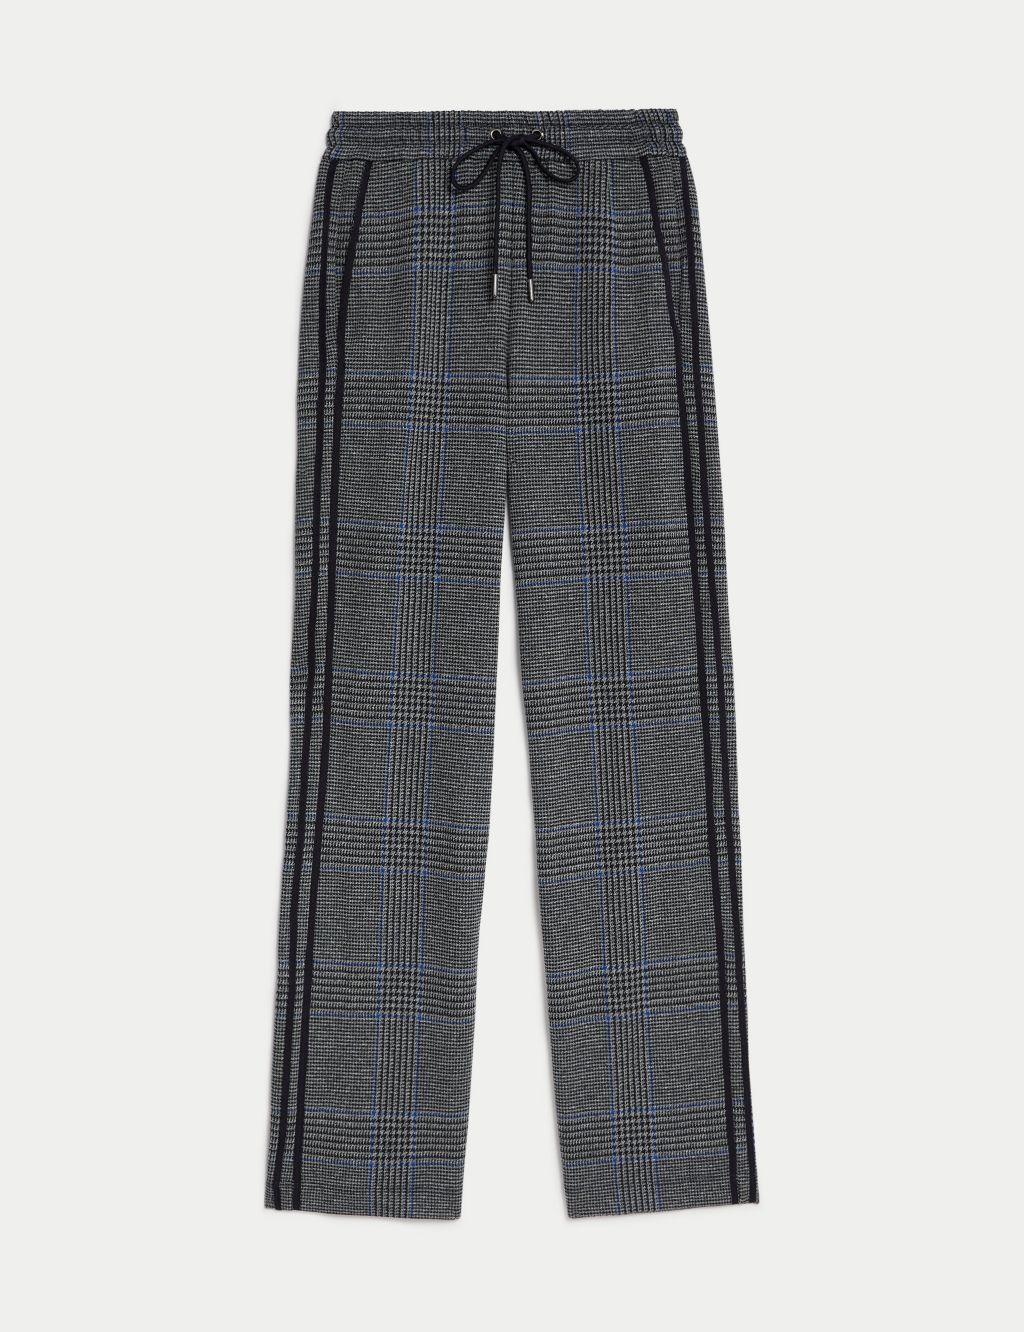 Checked Straight Leg Trousers image 2